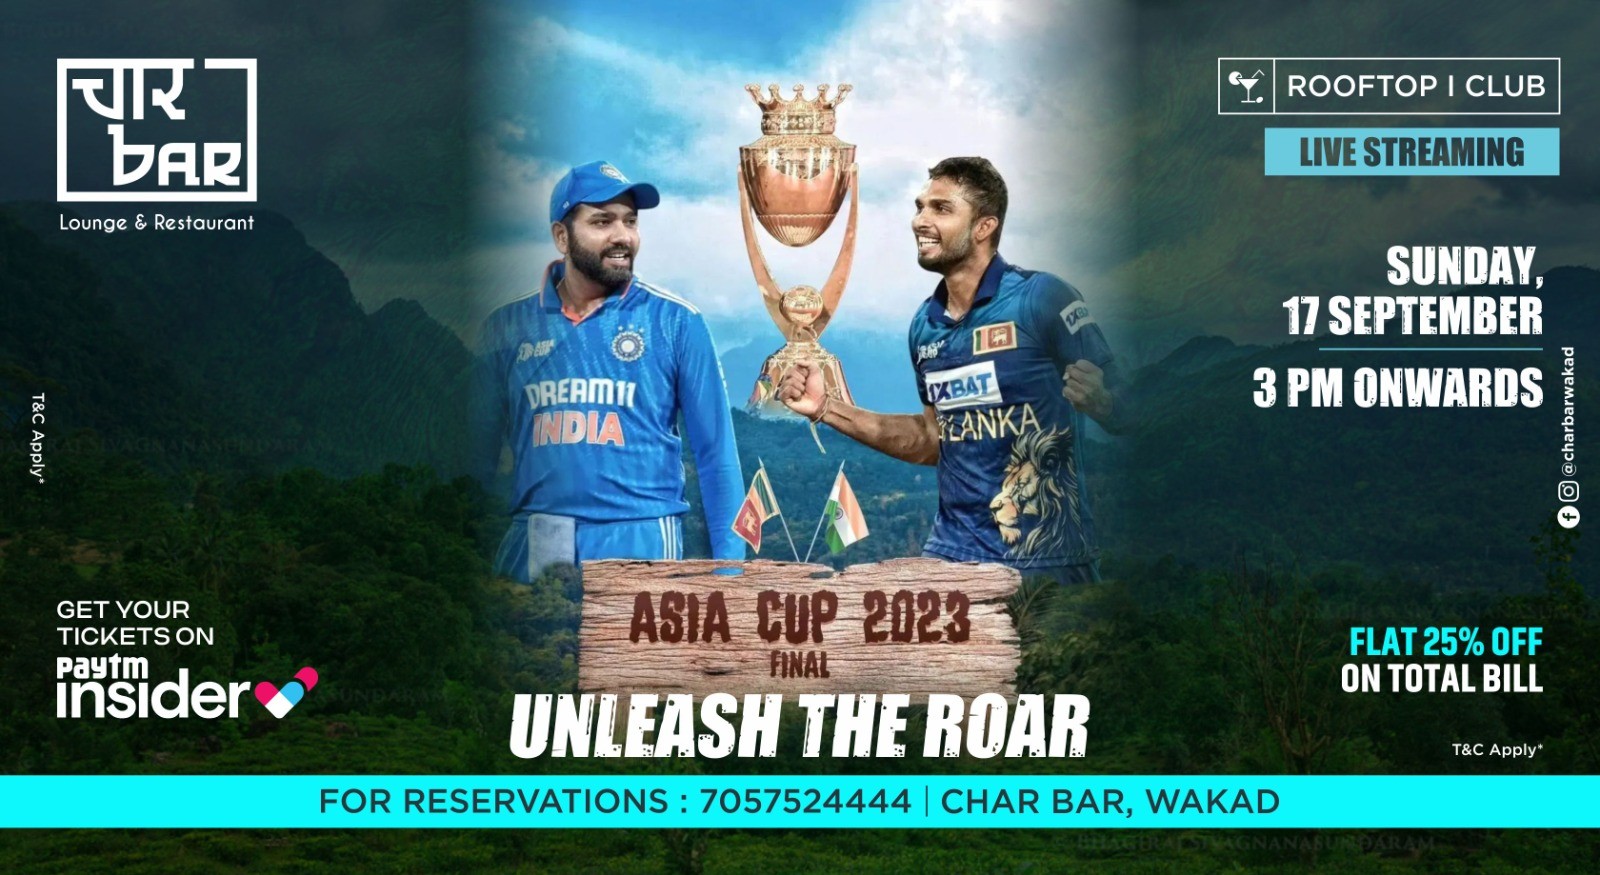 Asia Cup Final 23